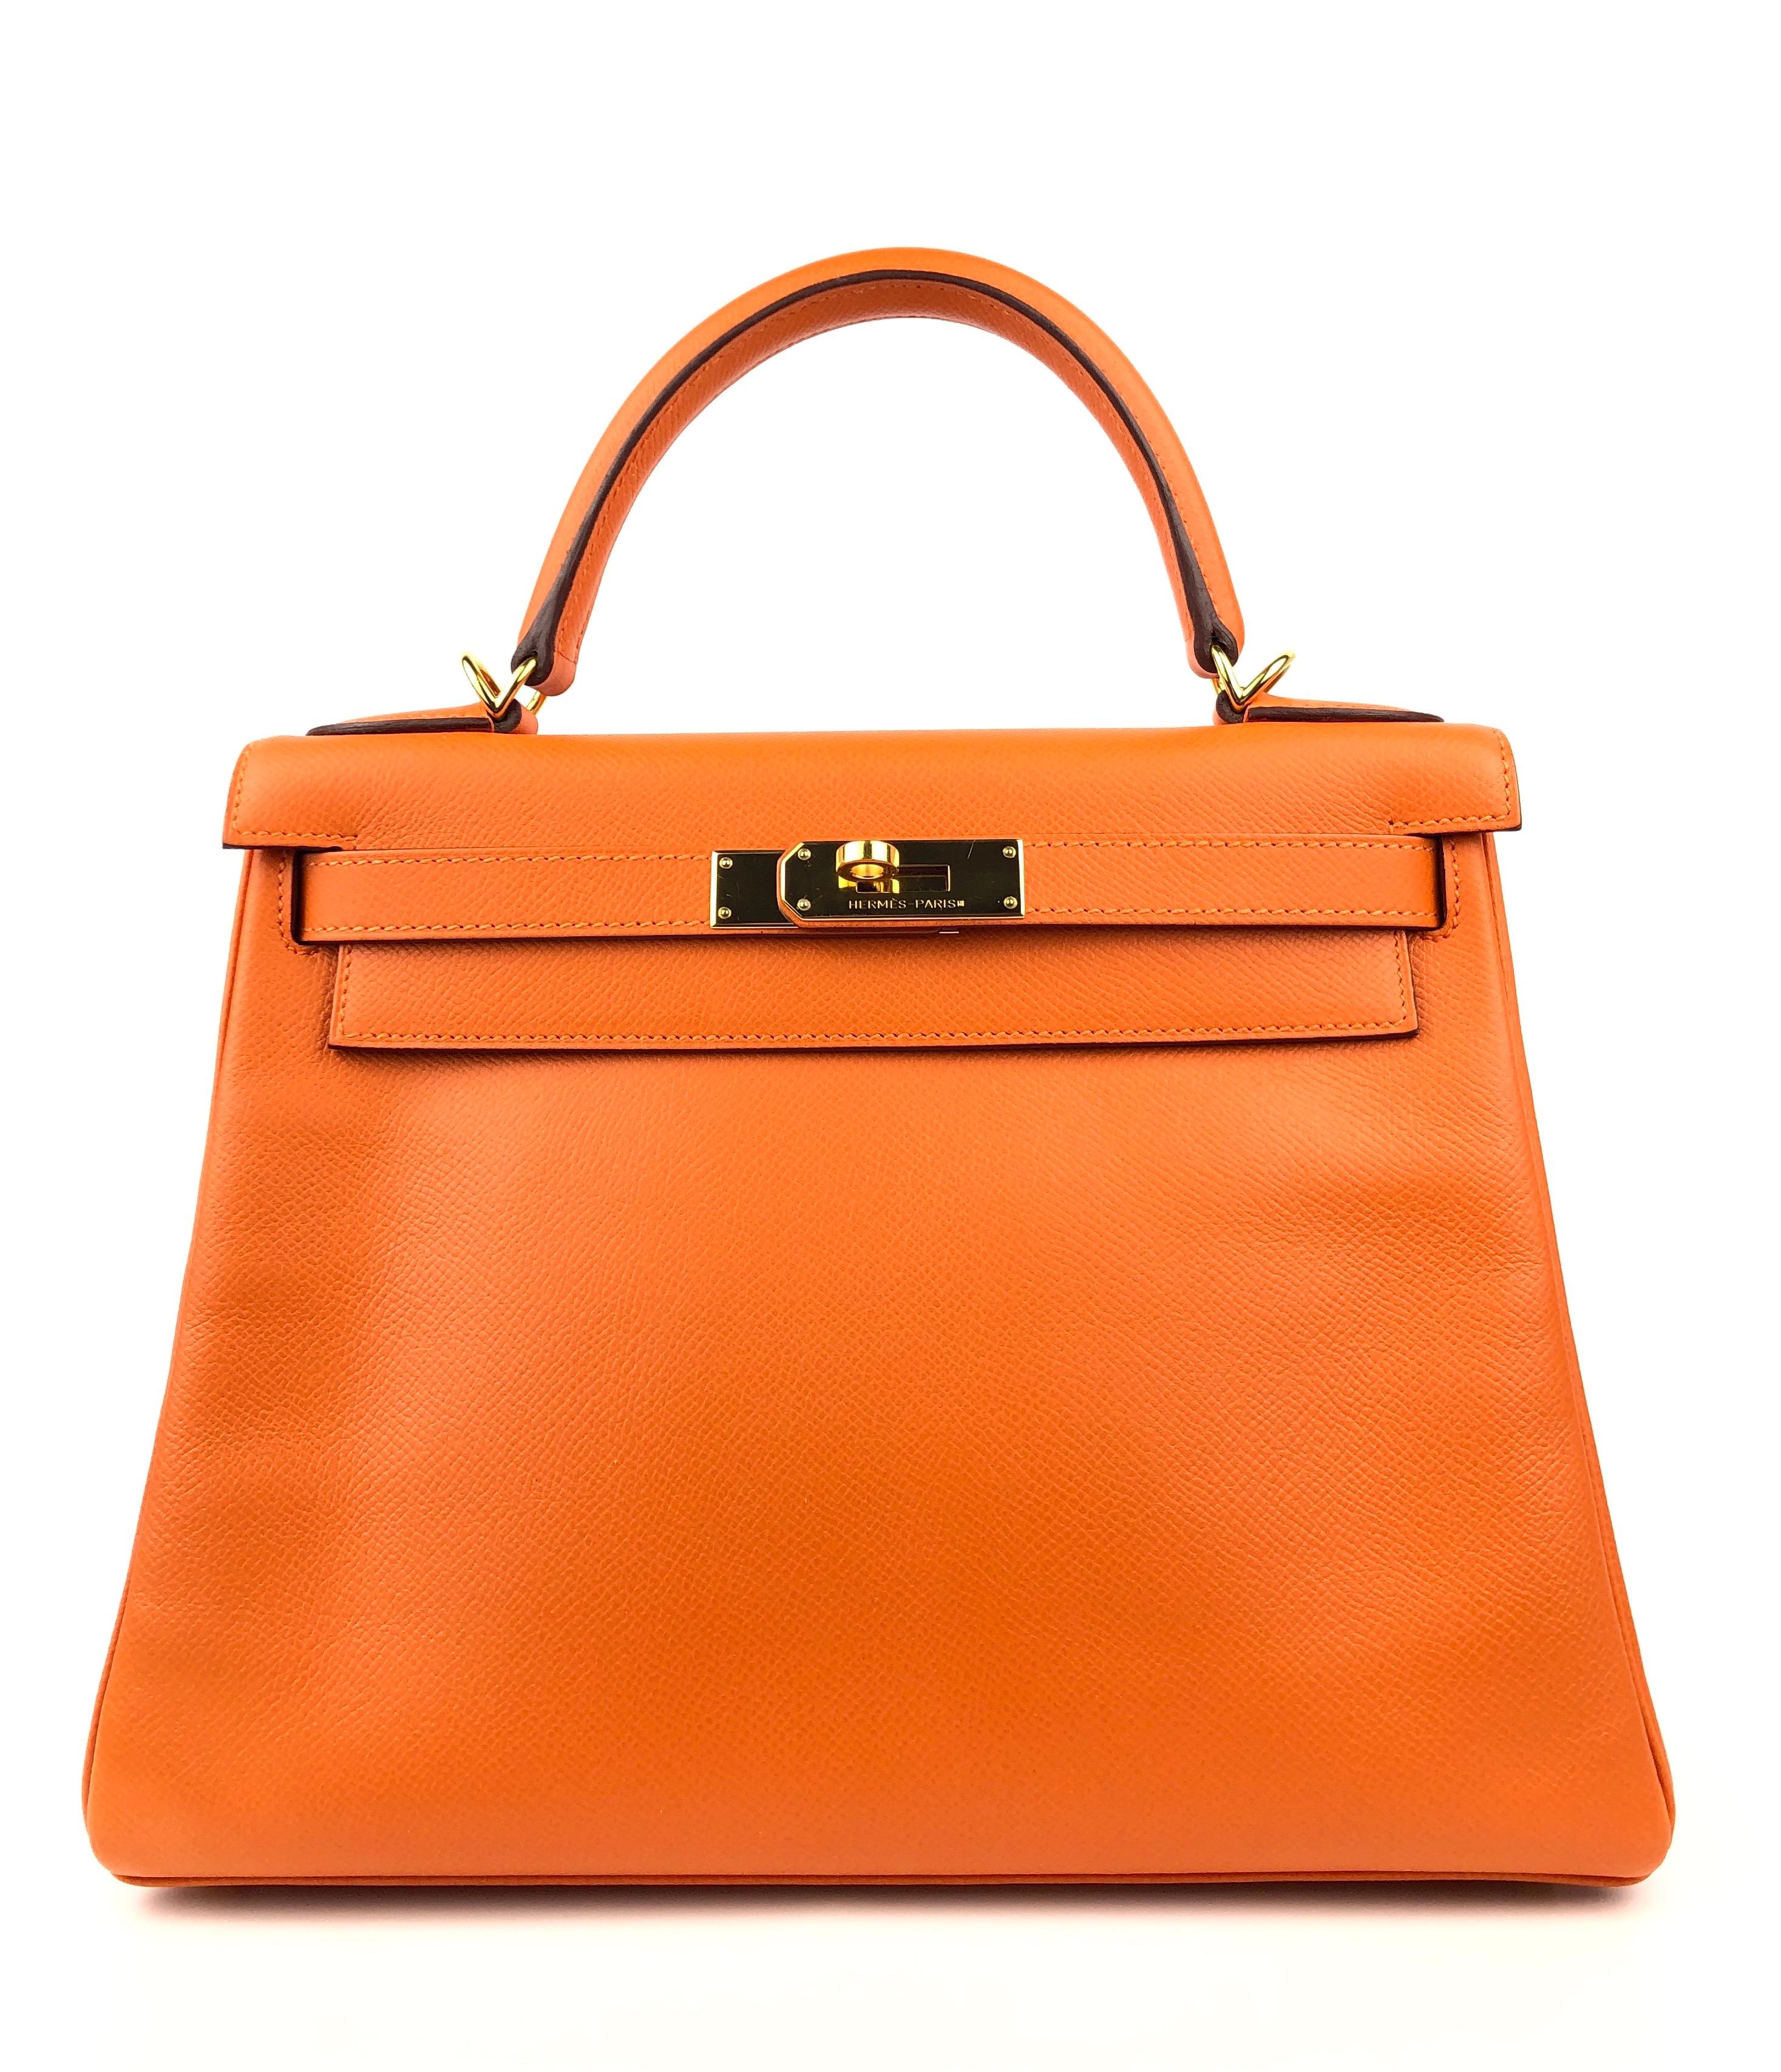 Stunning Hermes Kelly 28 Orange Epsom Gold Hardware. Excellent Condition, light hairlines on hardware, excellent corners and structure. 

Shop with Confidence from Lux Addicts. Authenticity Guaranteed! 